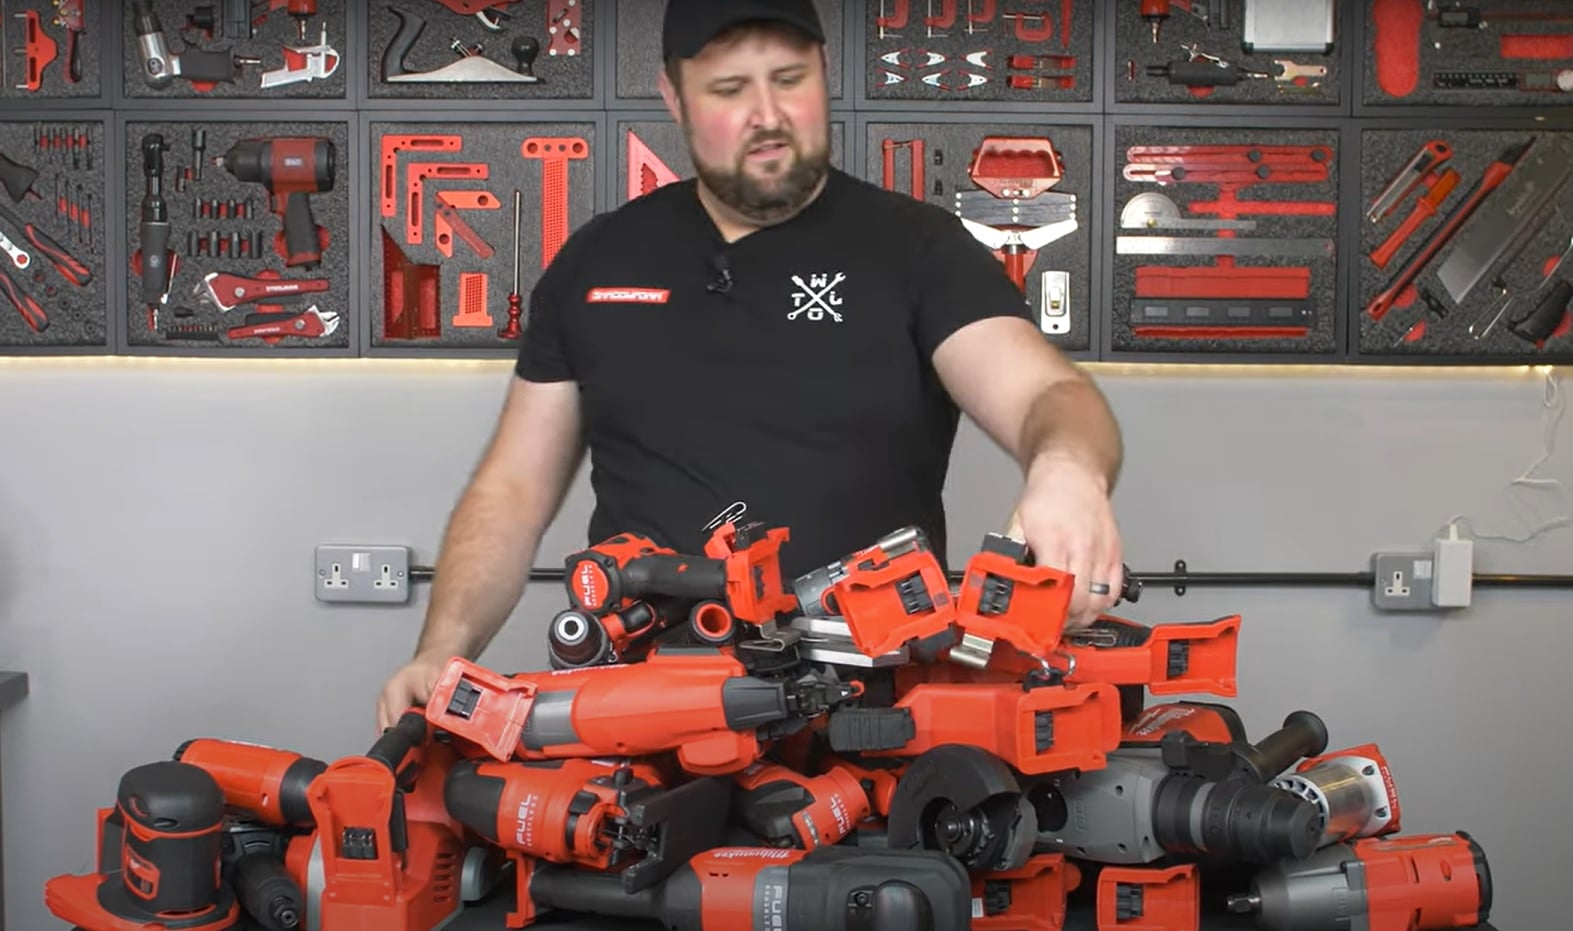 Our Milwaukee power tool haul with thanks to the guys at Powertool Mate